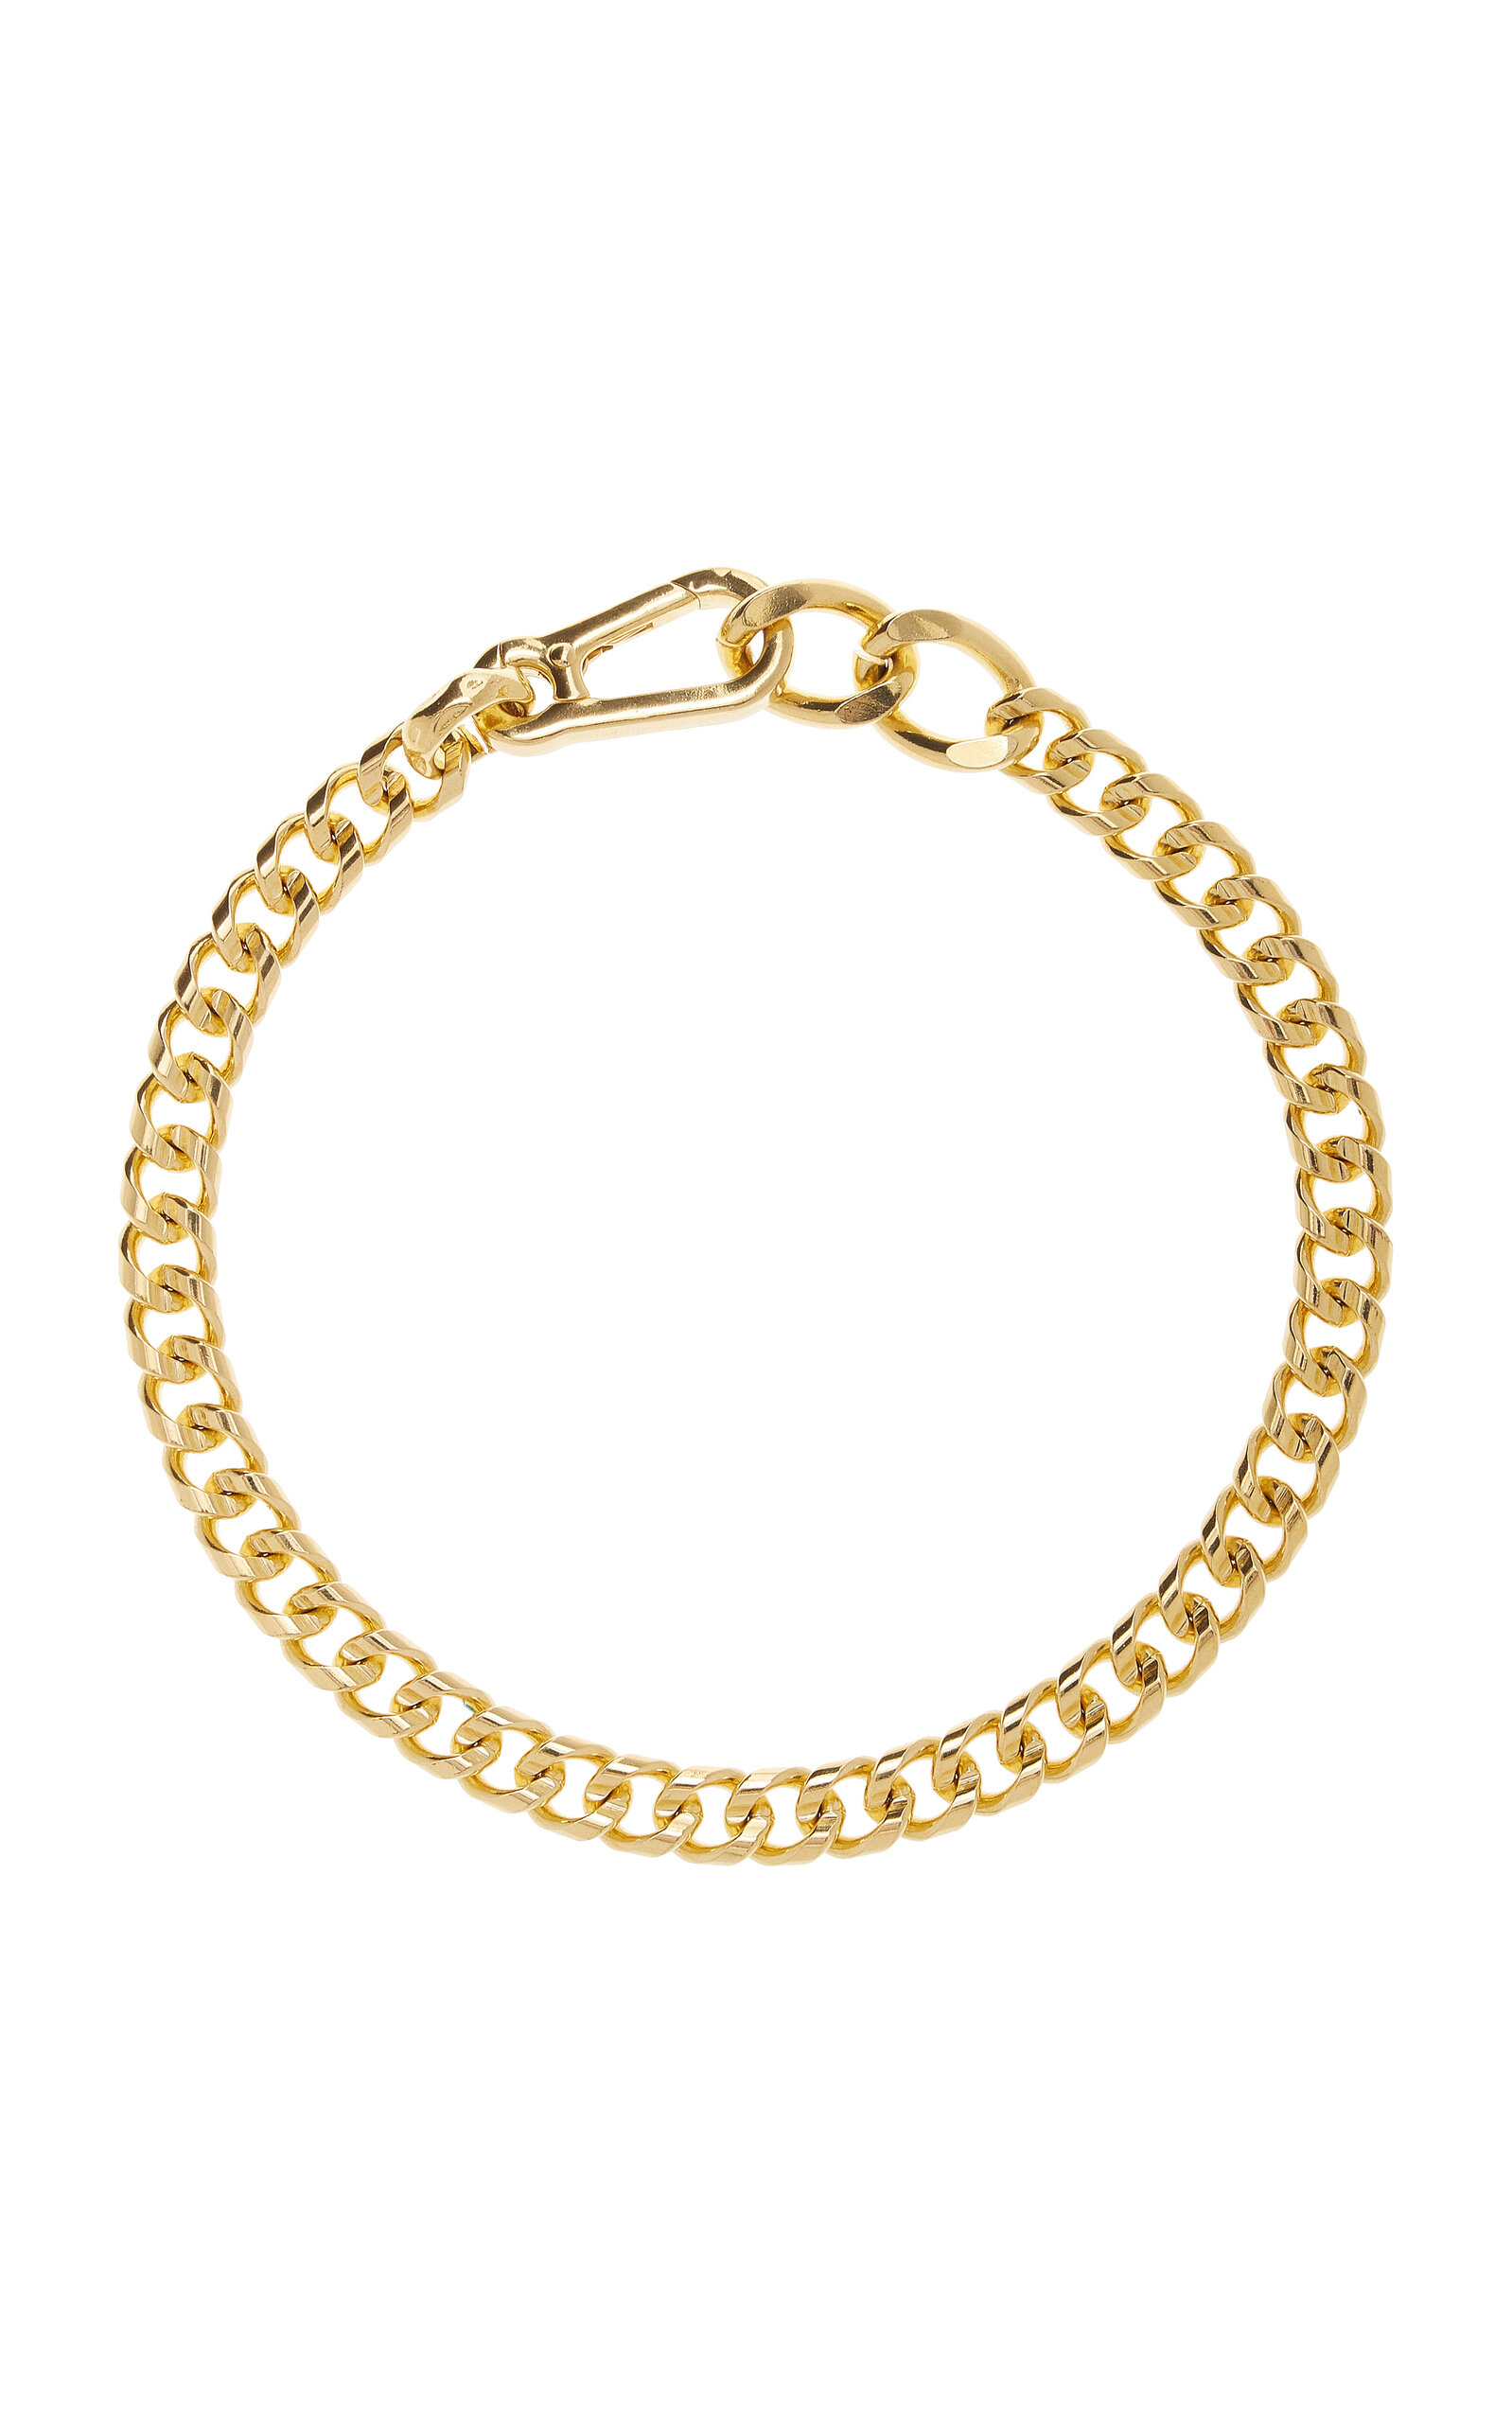 Martine Ali Women's Exclusive Curb 14k Gold Dipped Necklace